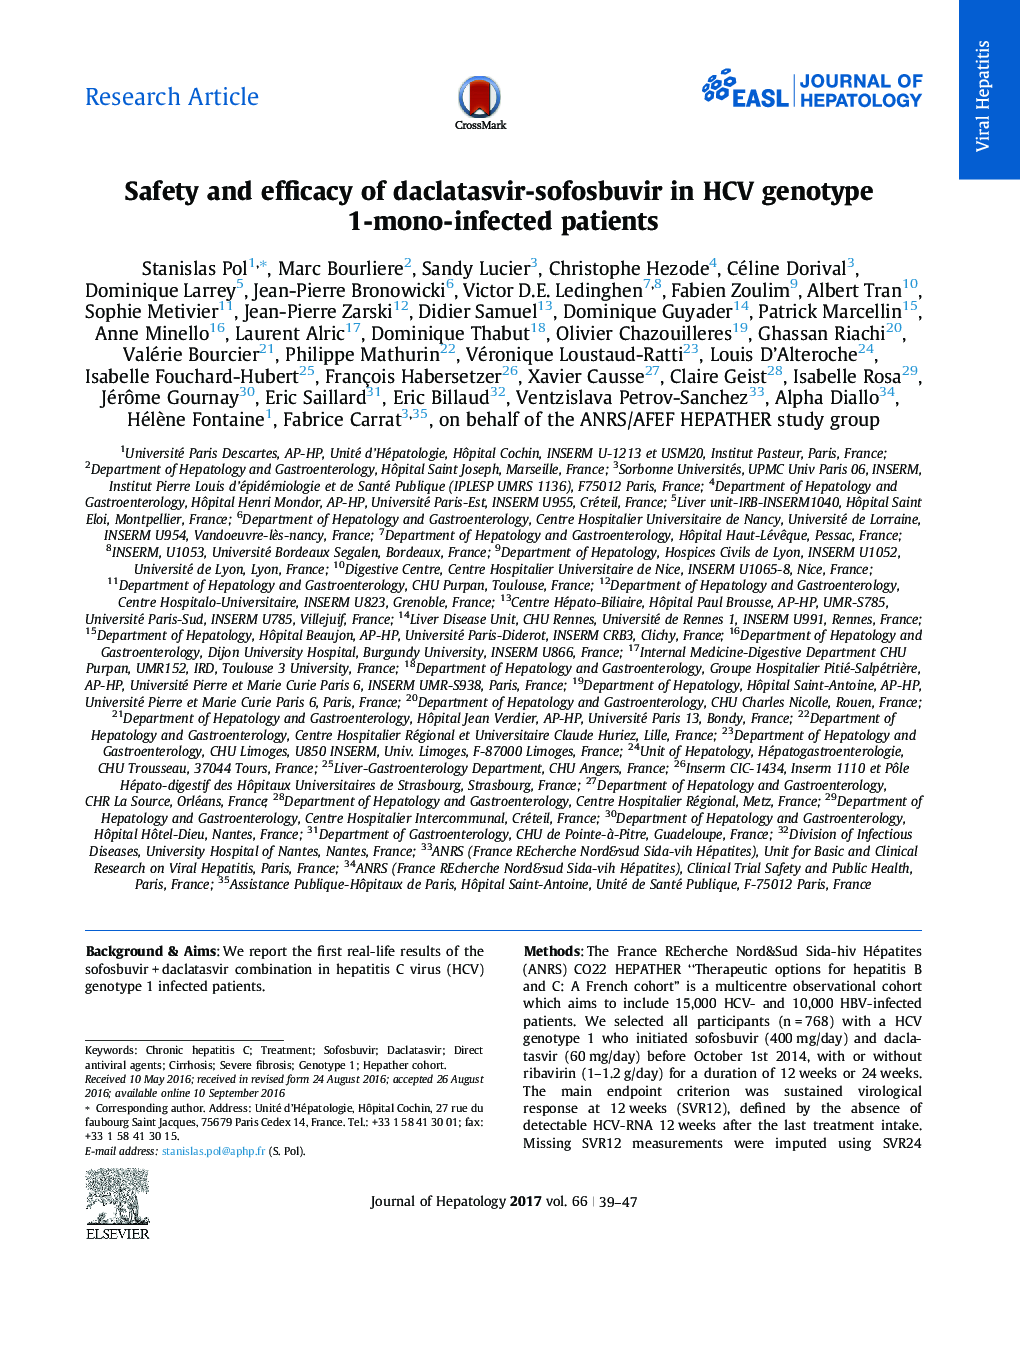 Safety and efficacy of daclatasvir-sofosbuvir in HCV genotype 1-mono-infected patients